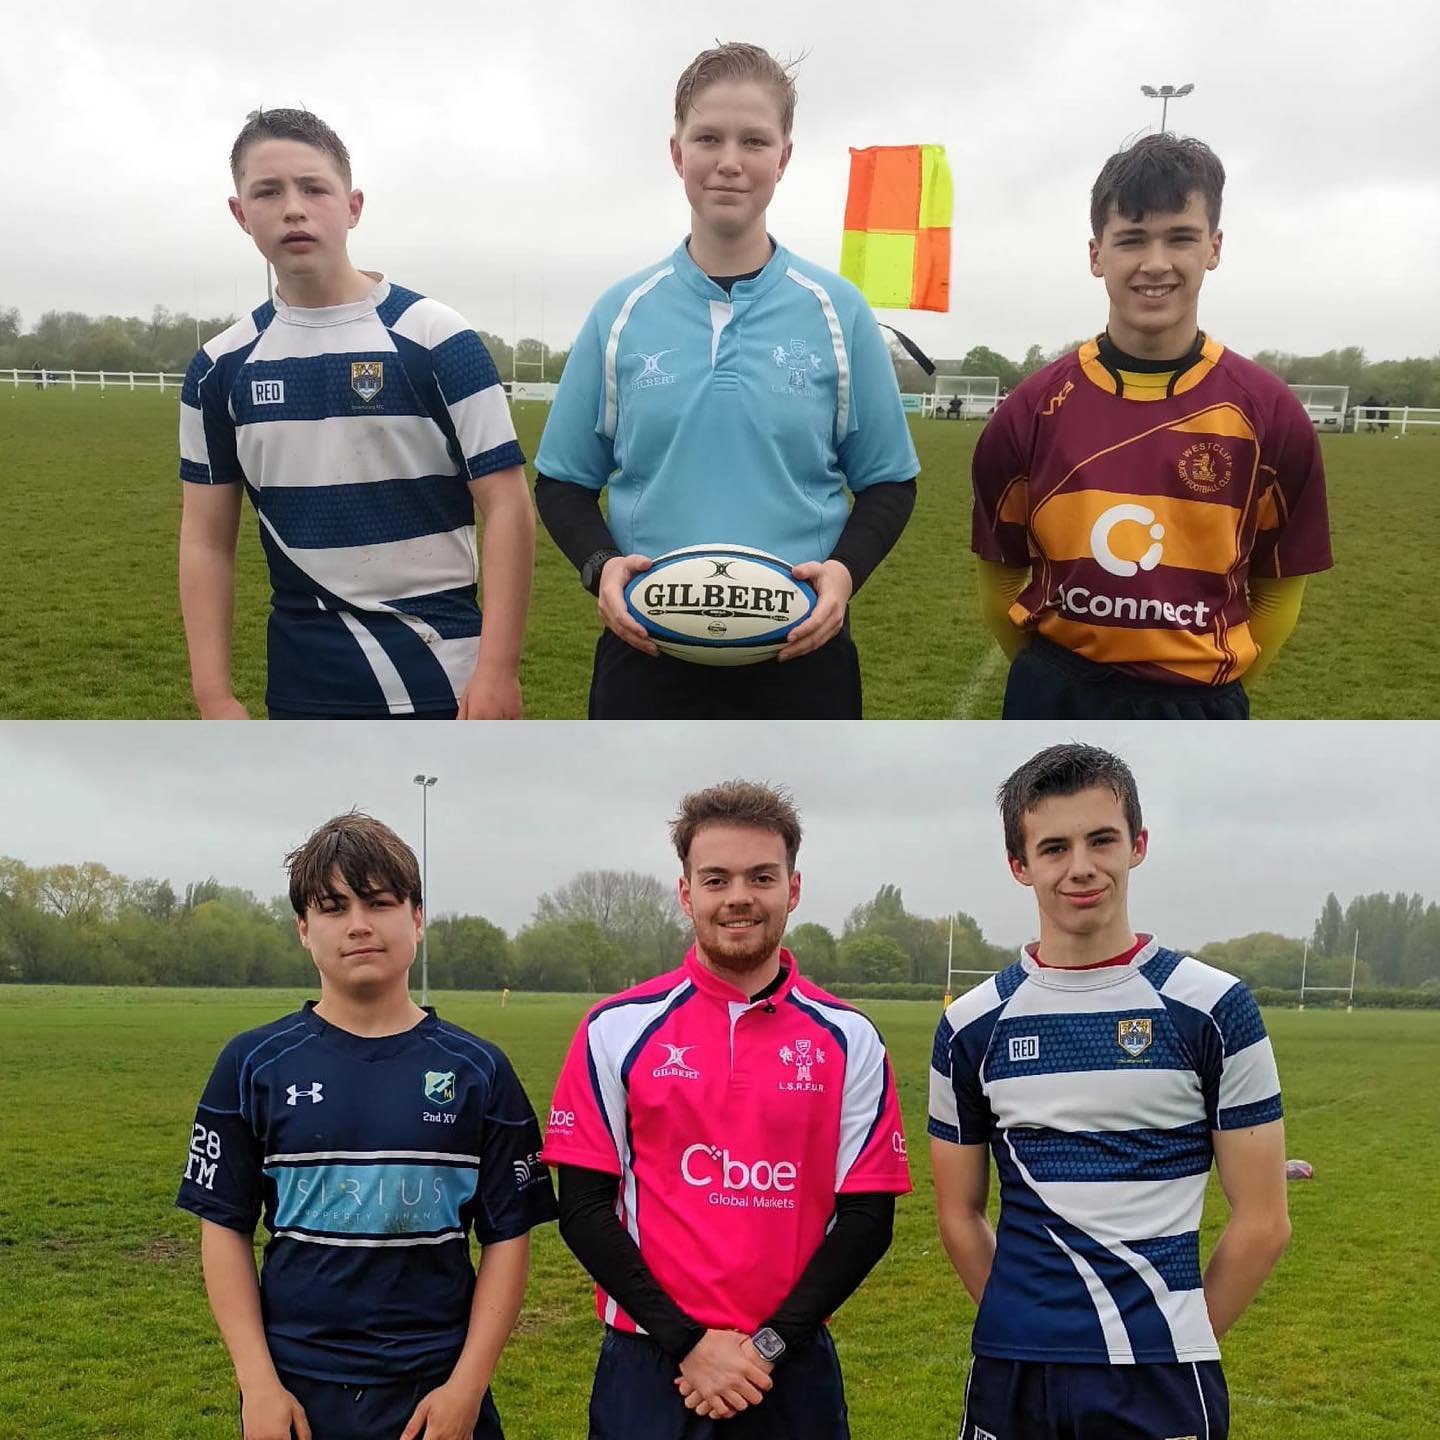 28.04.24 - 5 cracking age-grade finals games today at @westcliffrugby. Couple of YMOs from London North taking charge of the 1st 2 games:

U13 Boys: REF - Josh F.
U14 Boys: REF - Jack B.

Teams of 3 for the other games &gt;&gt;&gt;

U15 Boys: REF/AR1